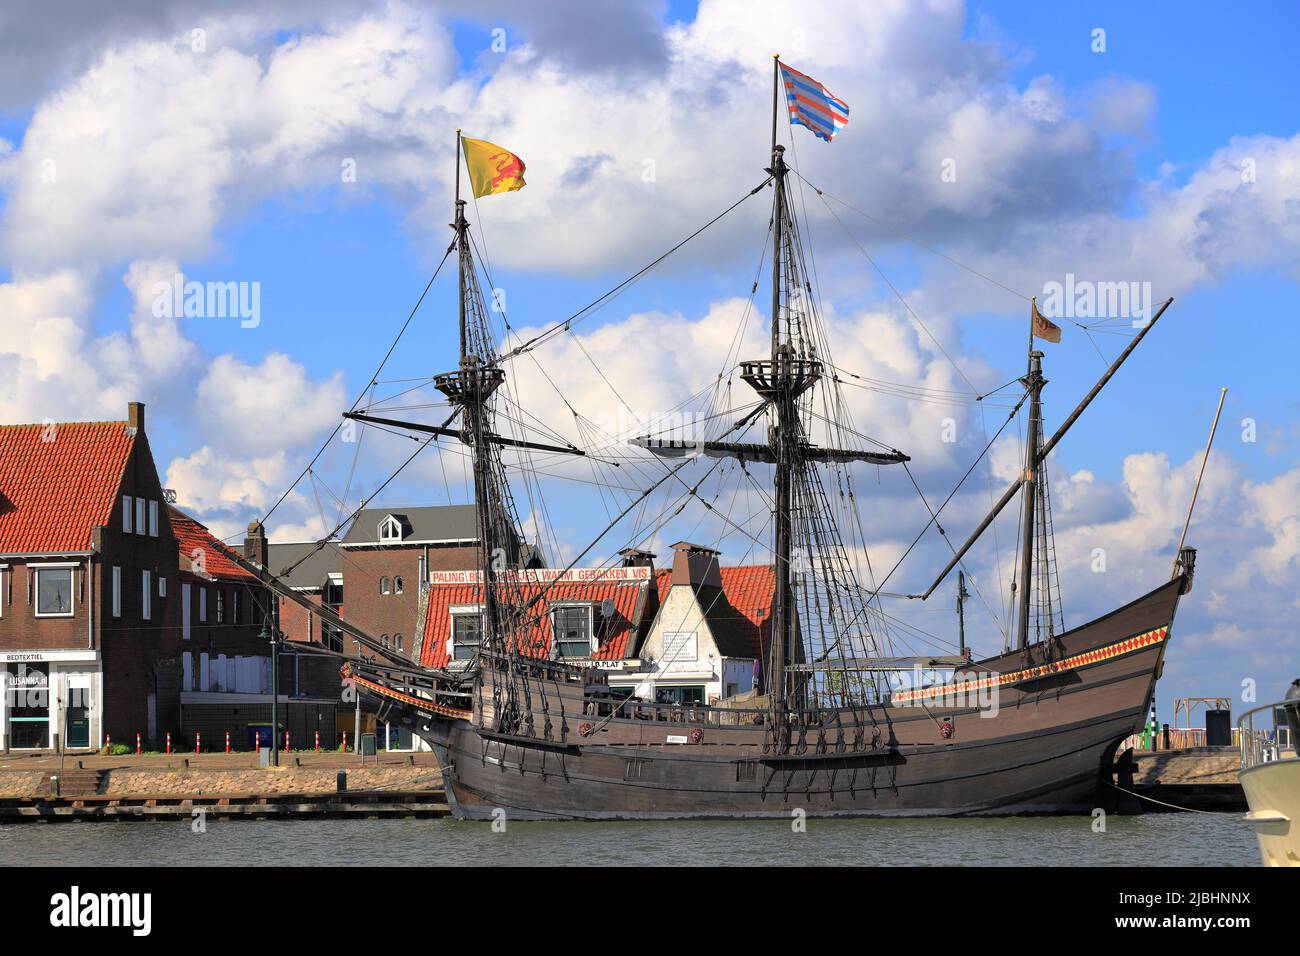 Volendam, the Netherlands - May 24, 2022: Visiting the Harbor of Volendam in North Holland a sunny day in May. Stock Photo